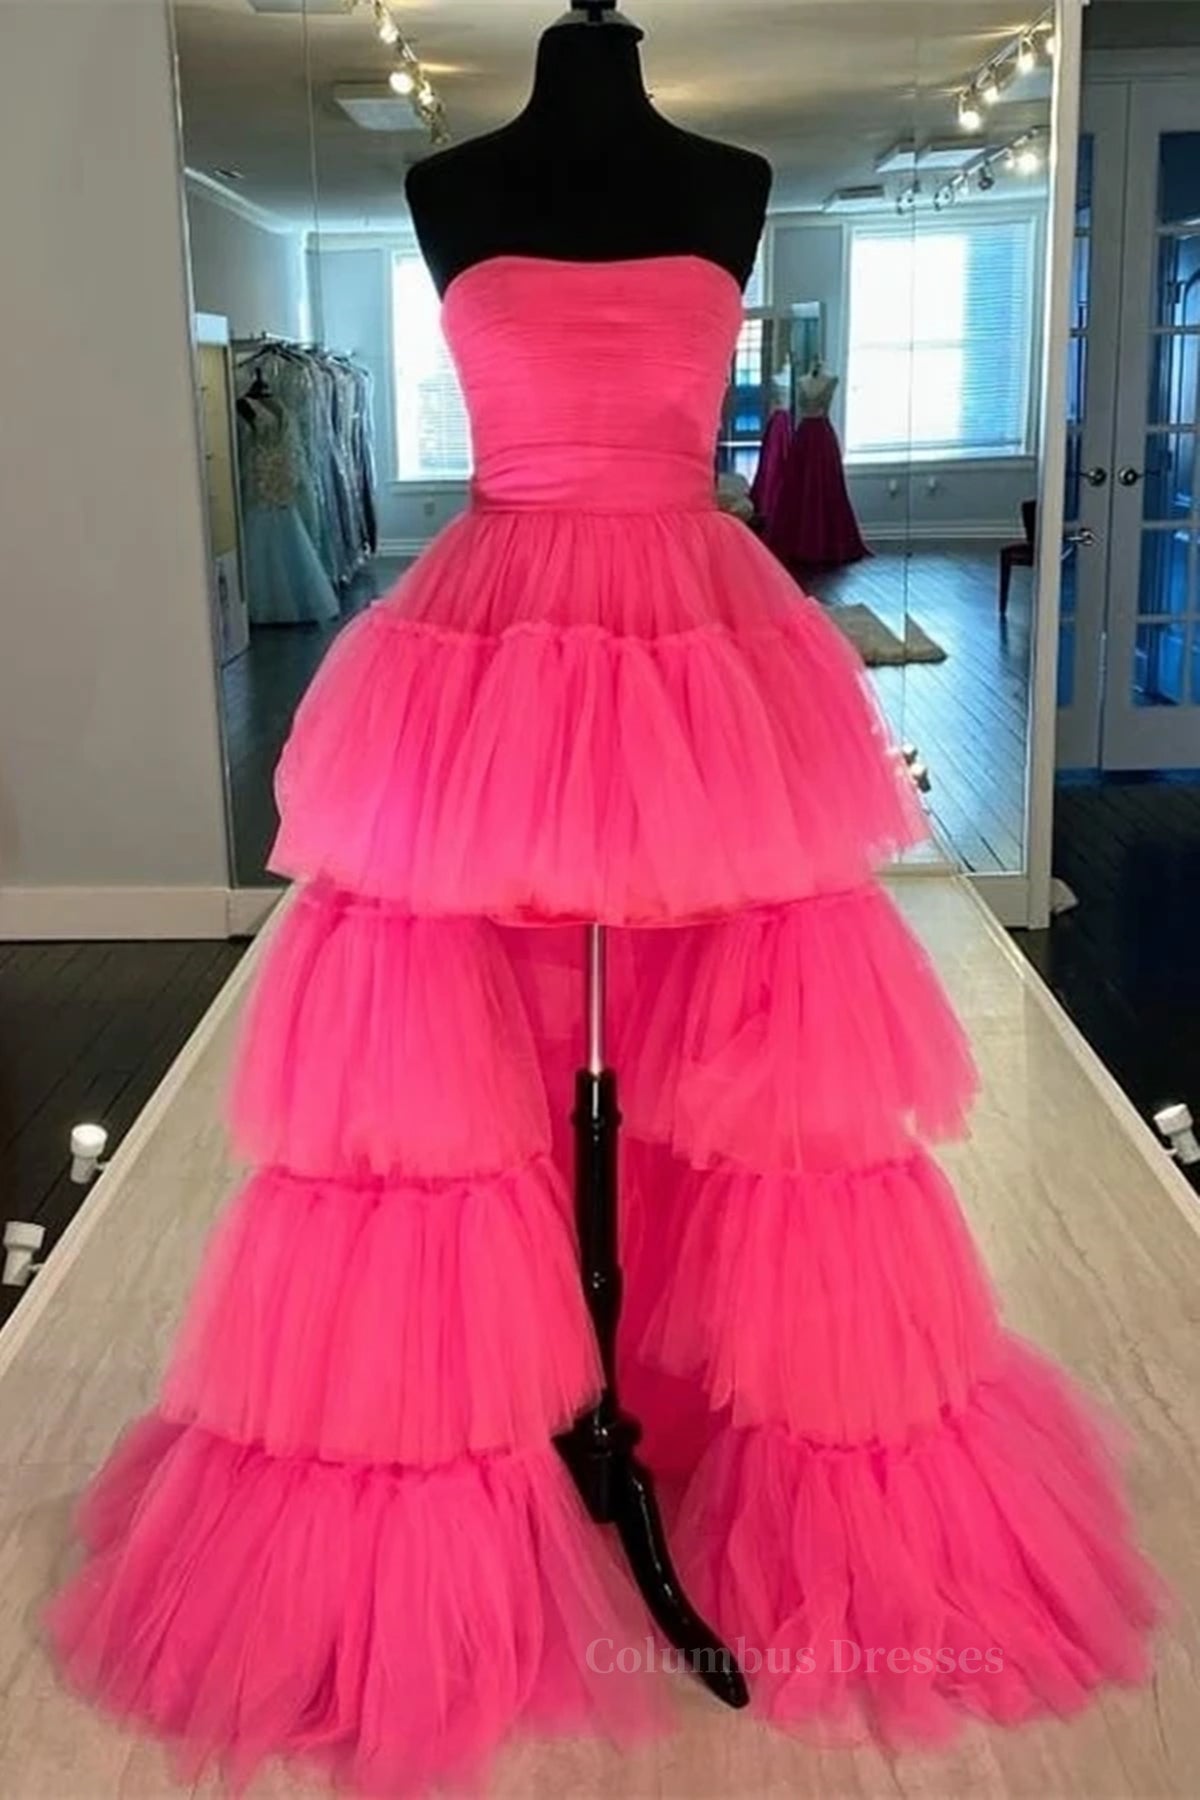 Prom Dress Outfit, Strapless Hot Pink High Low Prom Dresses, Hot Pink High Low Formal Homecoming Dresses